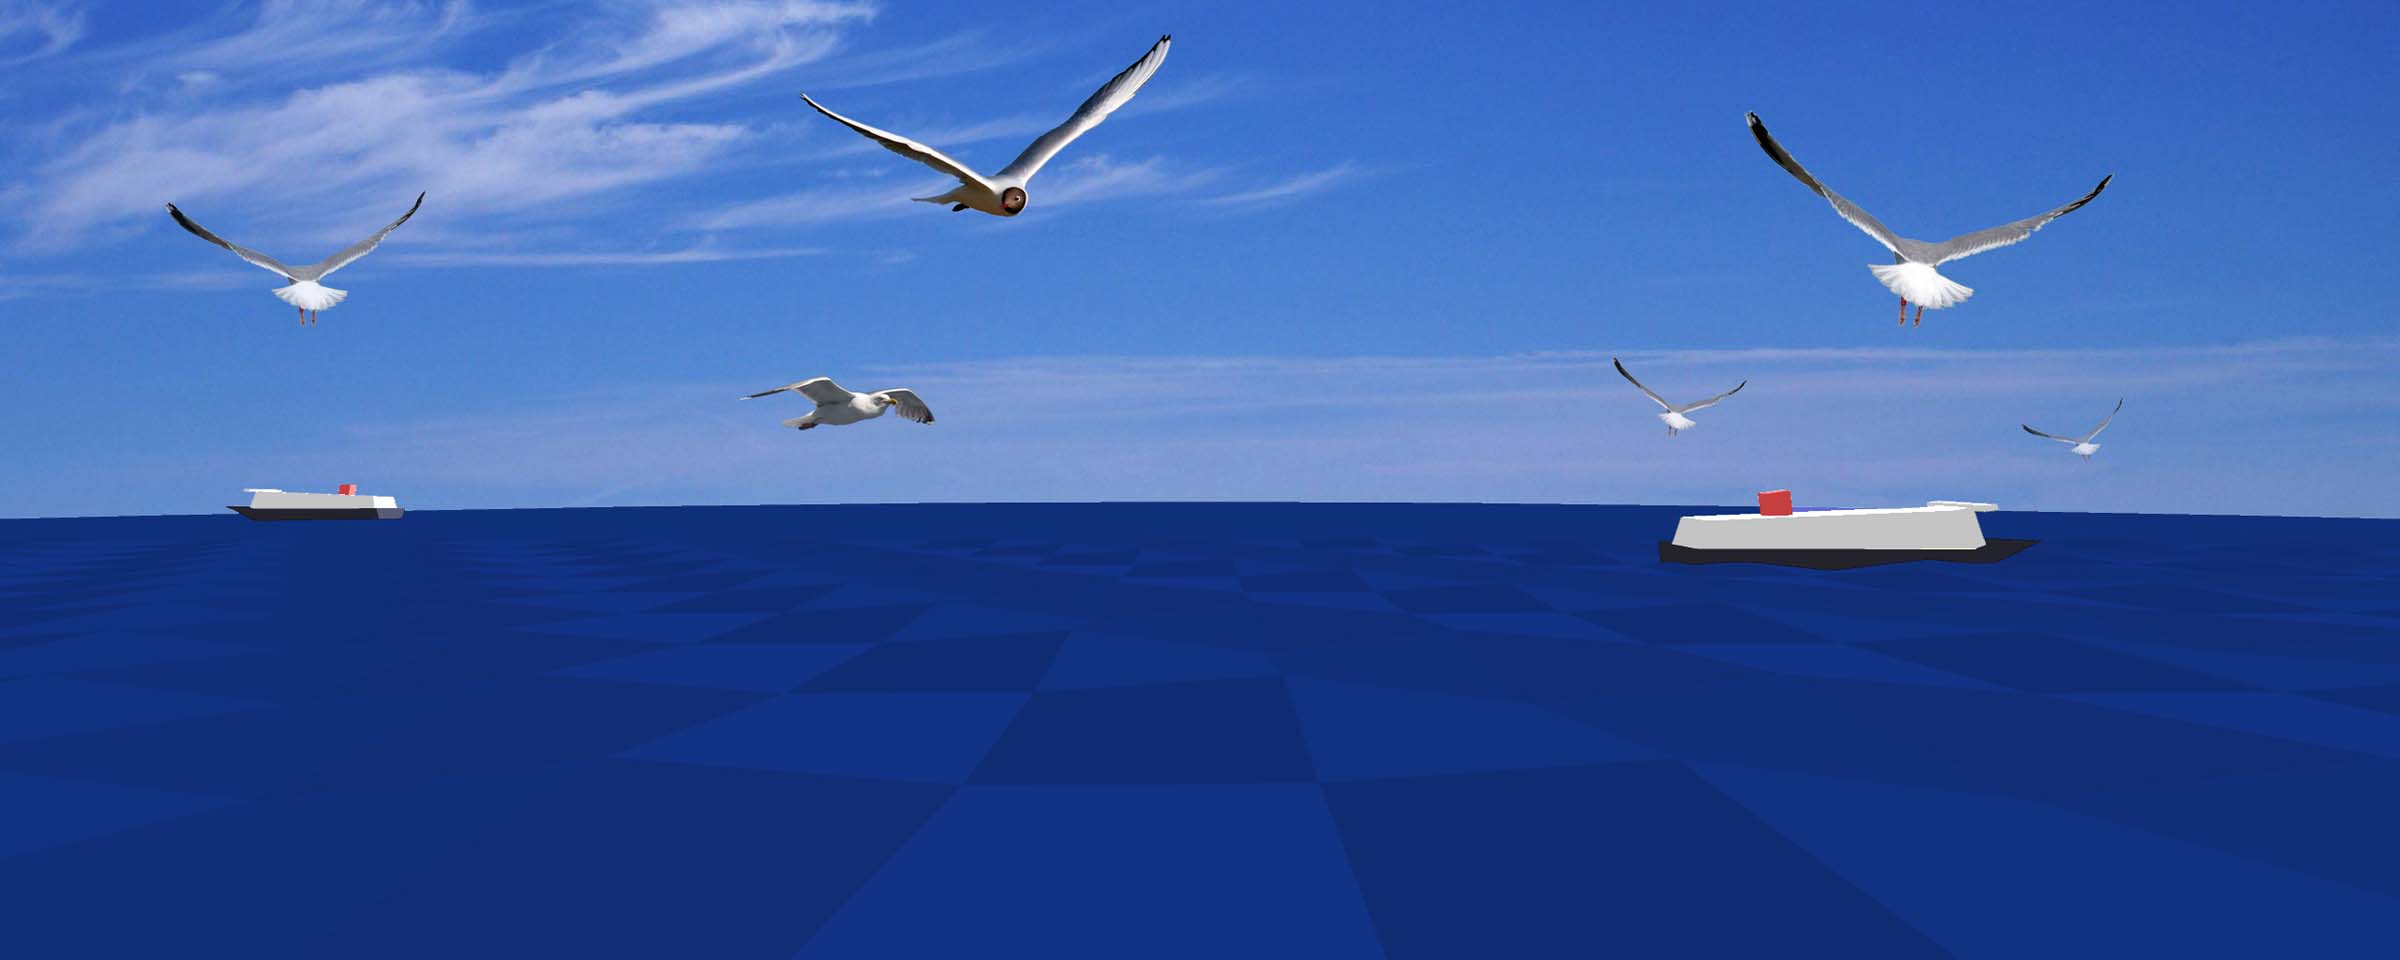 colour illustration of seagulls flying around with two ships in the background